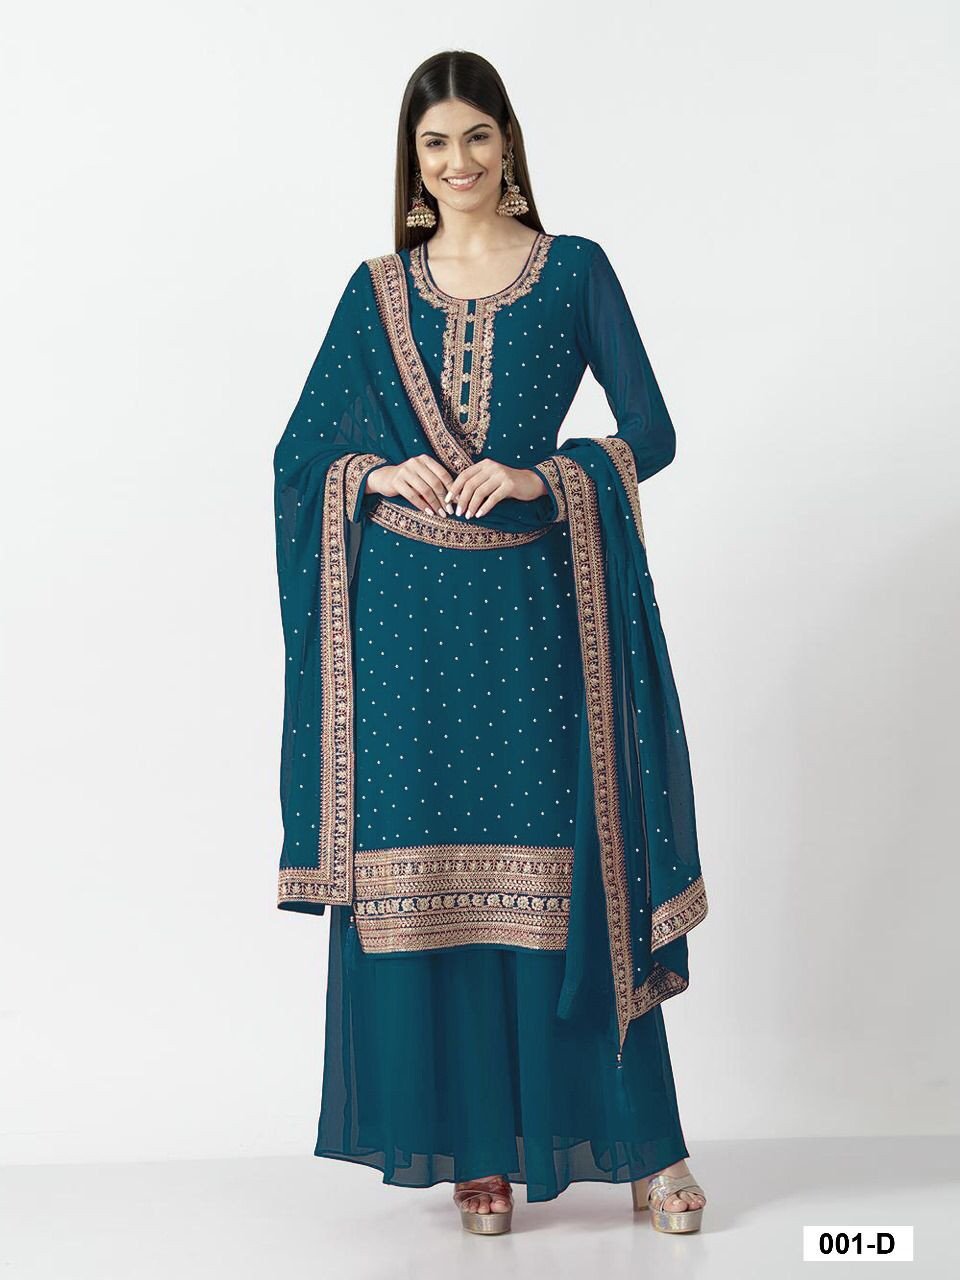 Buy Single dress online At wholesale rate in india